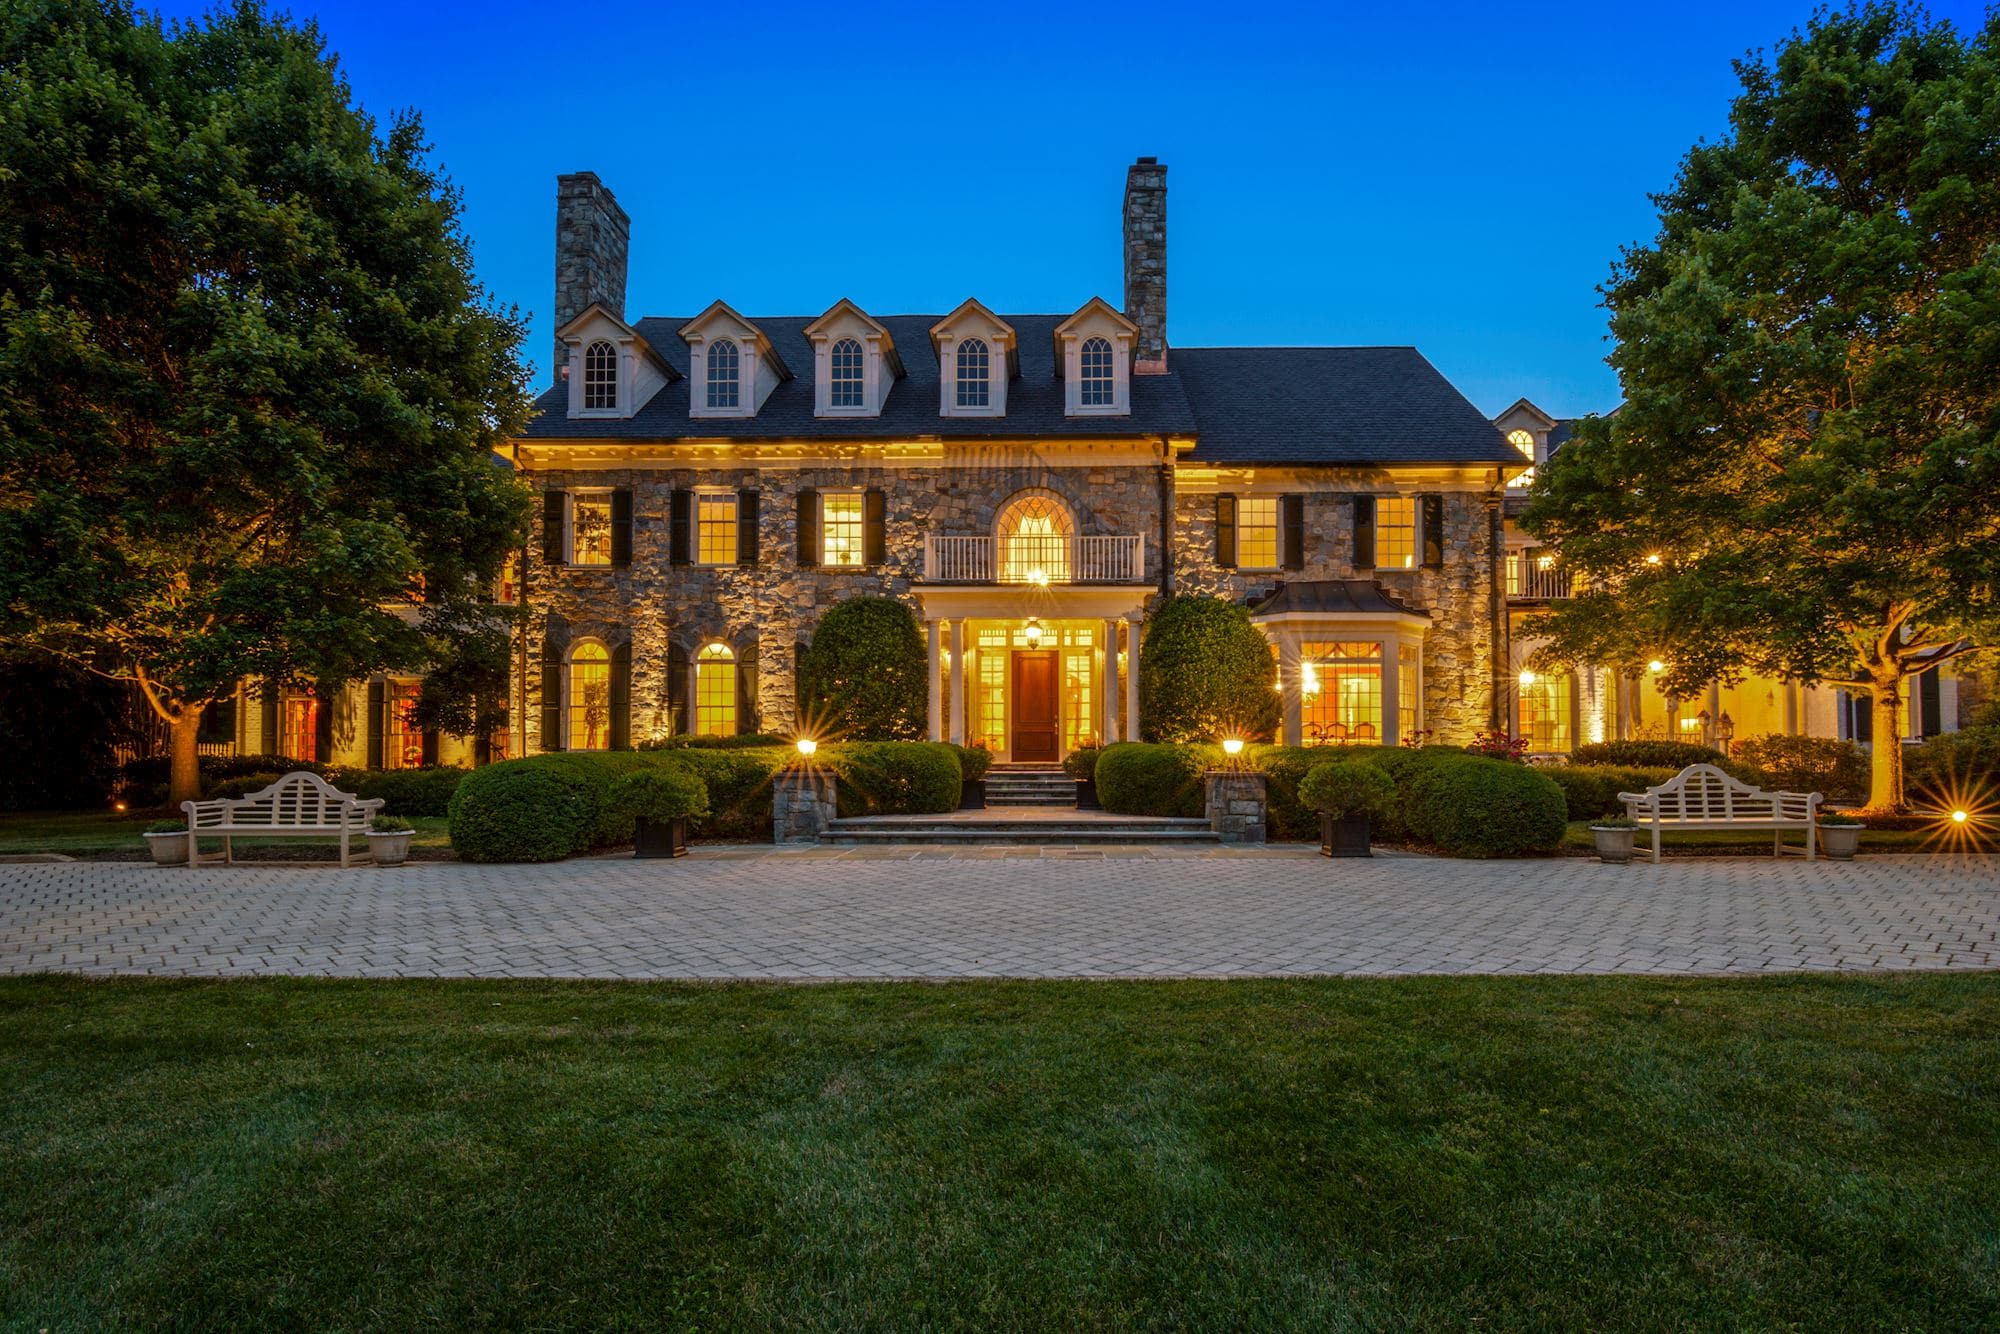 $9-Million Maryland Estate Has All The Toys: Planes, Trains And Automobiles